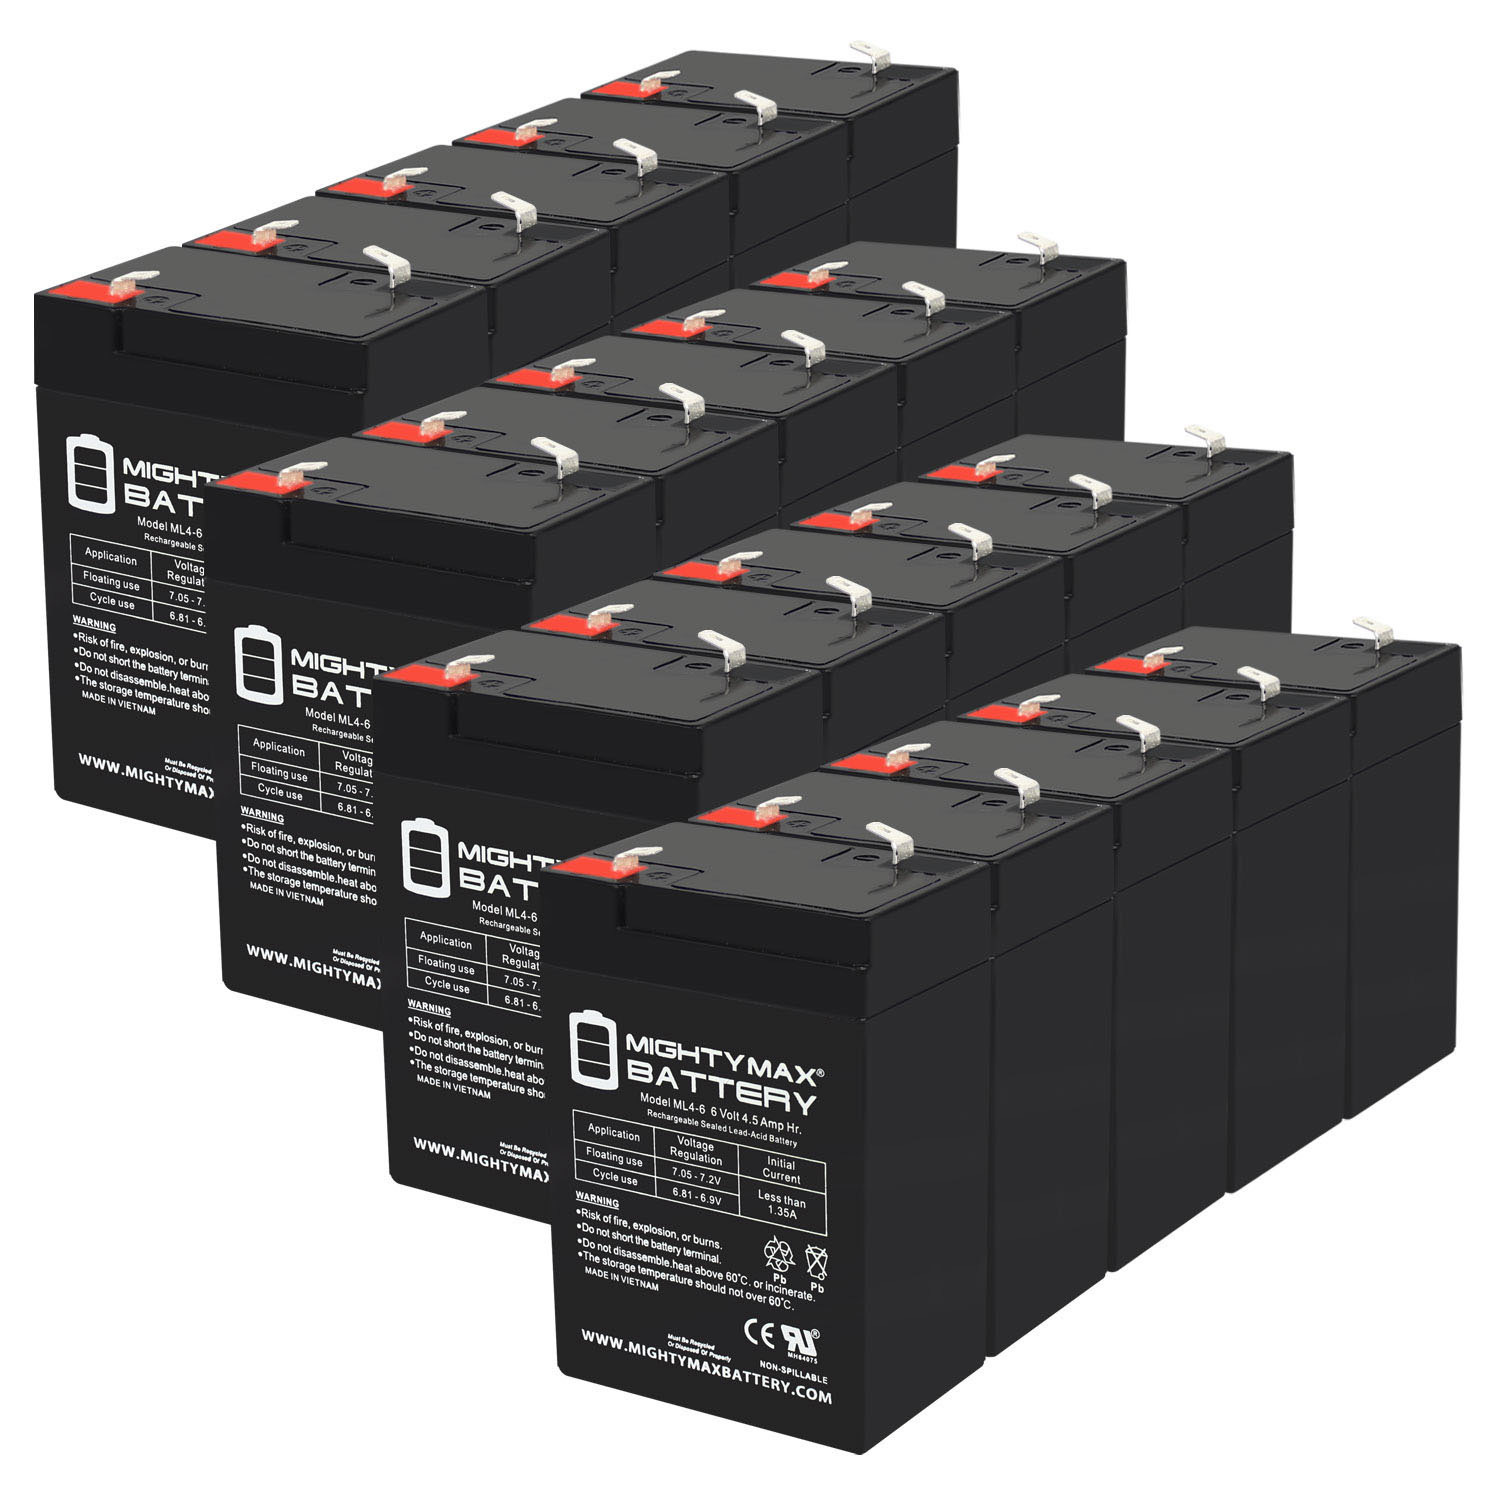 6V 4.5AH SLA Replacement Battery for Big Beam DZN-Led - 20 Pack